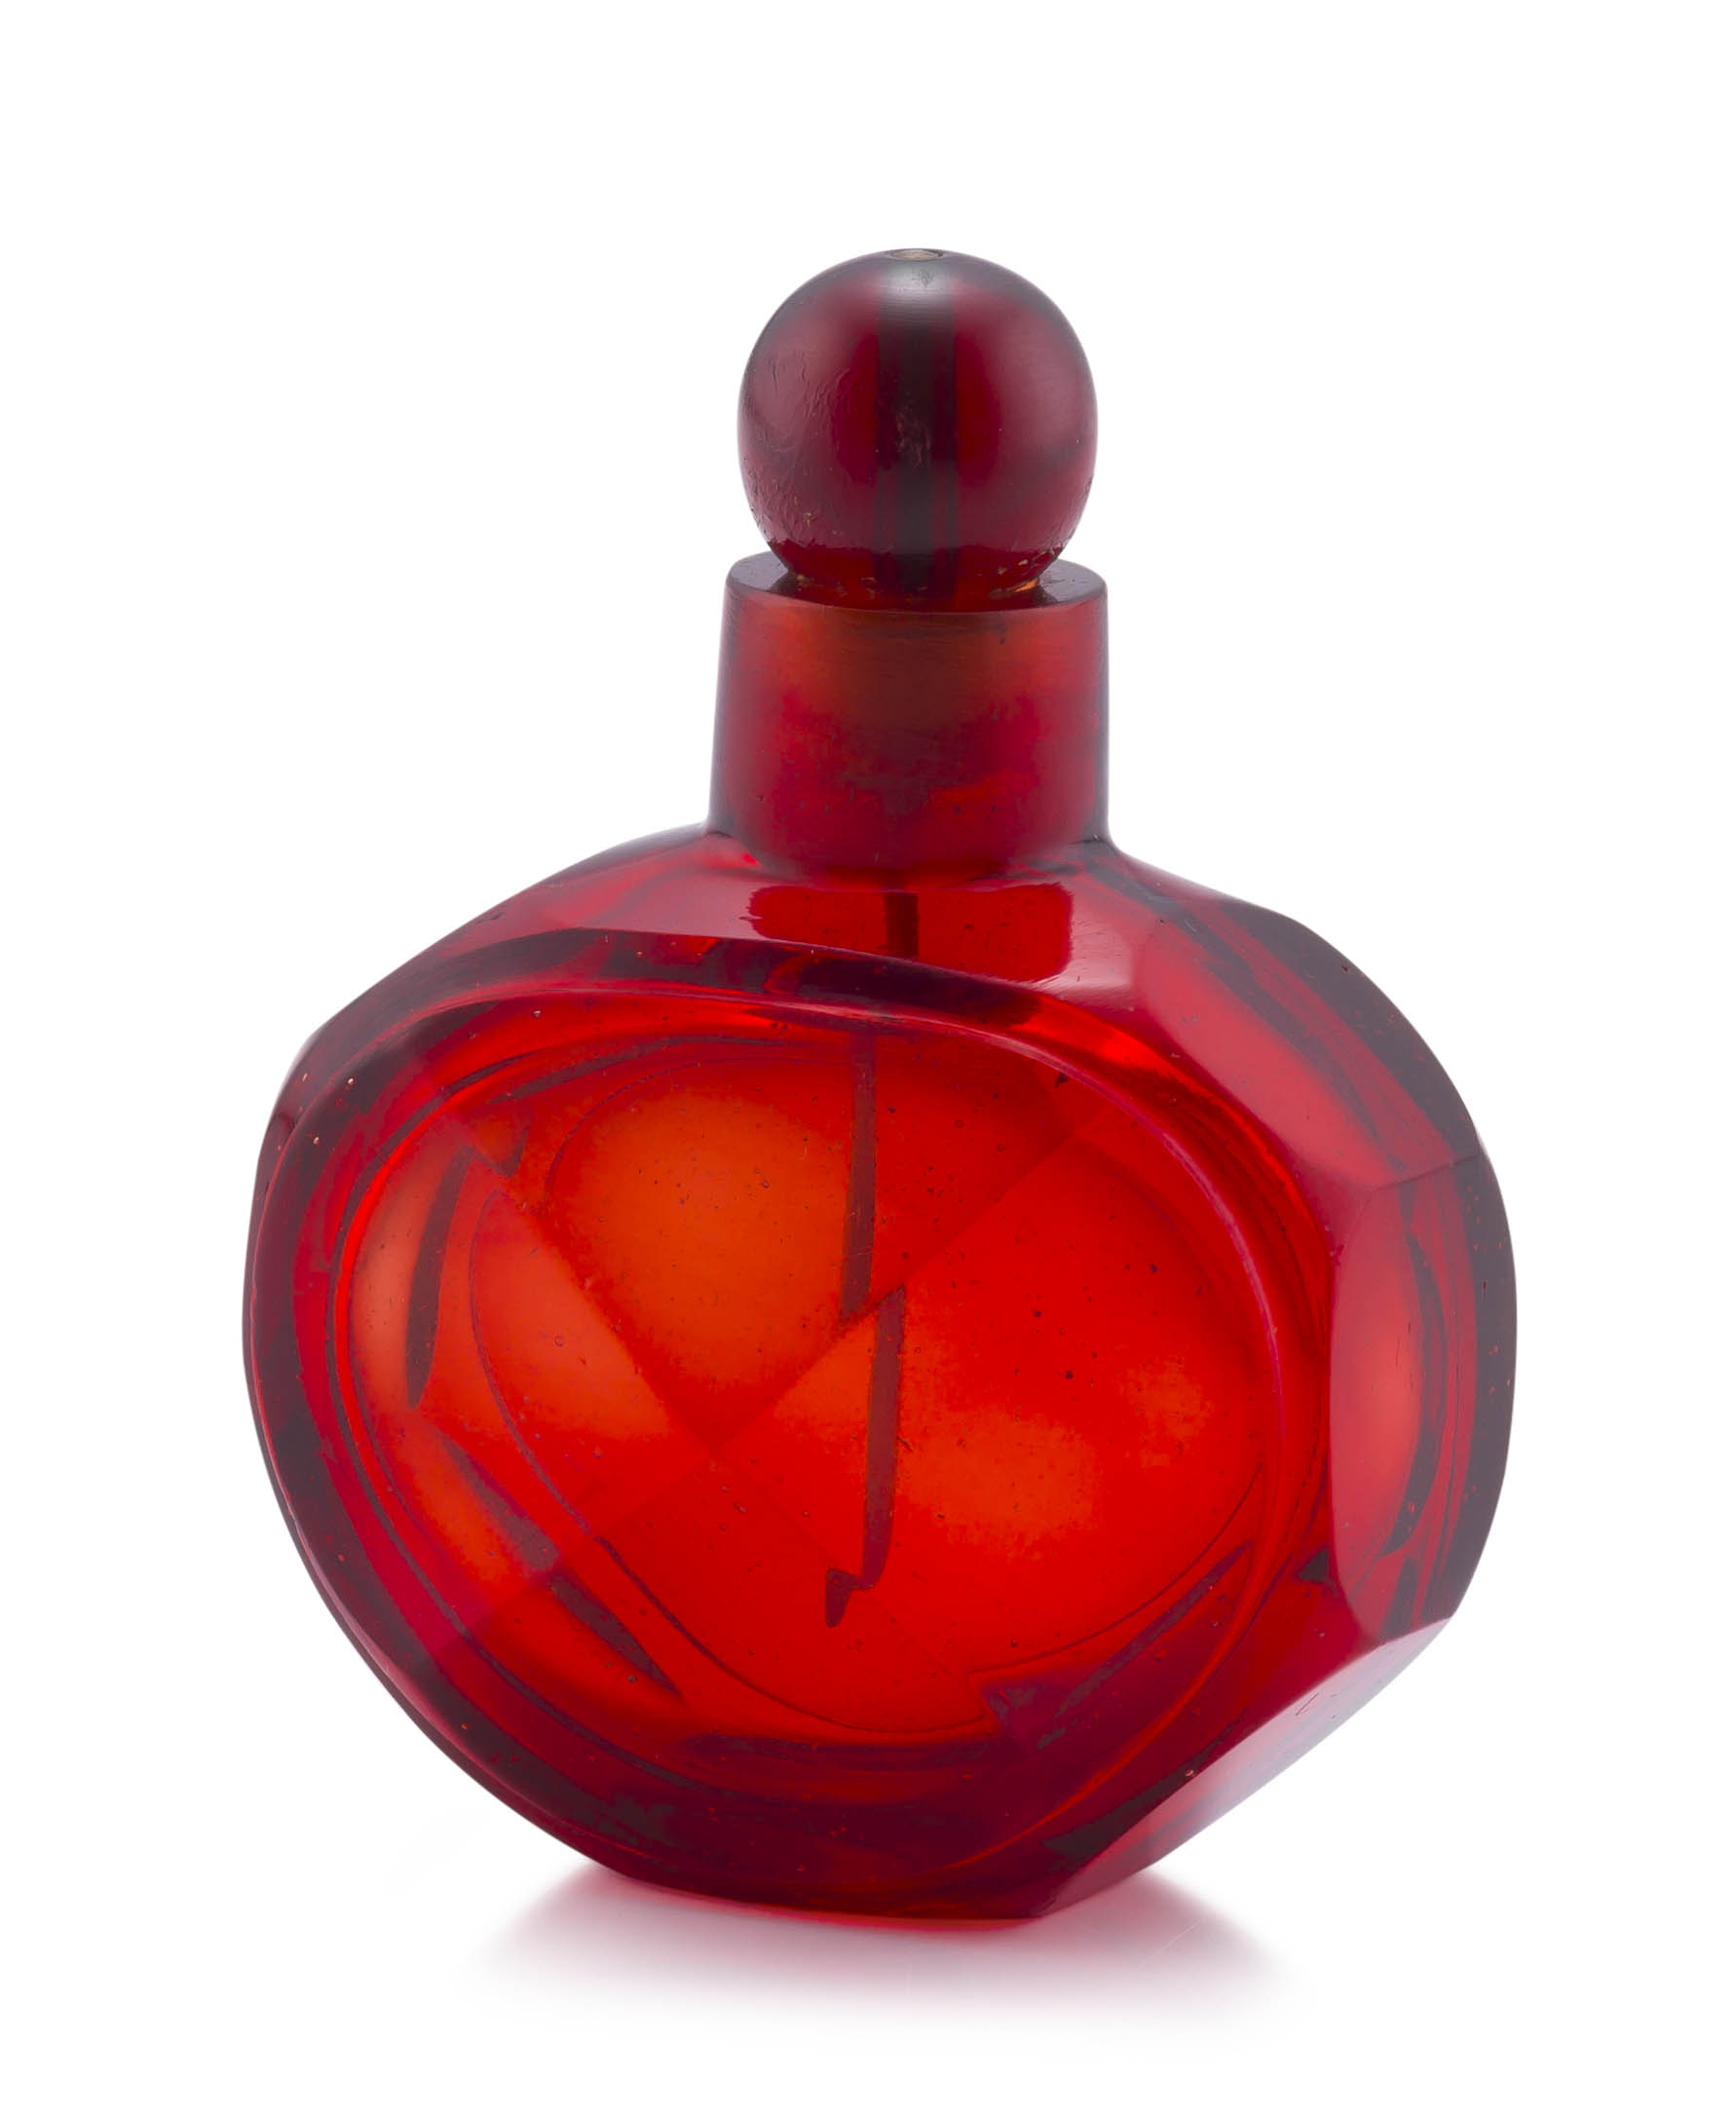 A Chinese ruby-red glass snuff bottle, Imperial Glassworks, Beijing, Qing Dynasty, 18th century